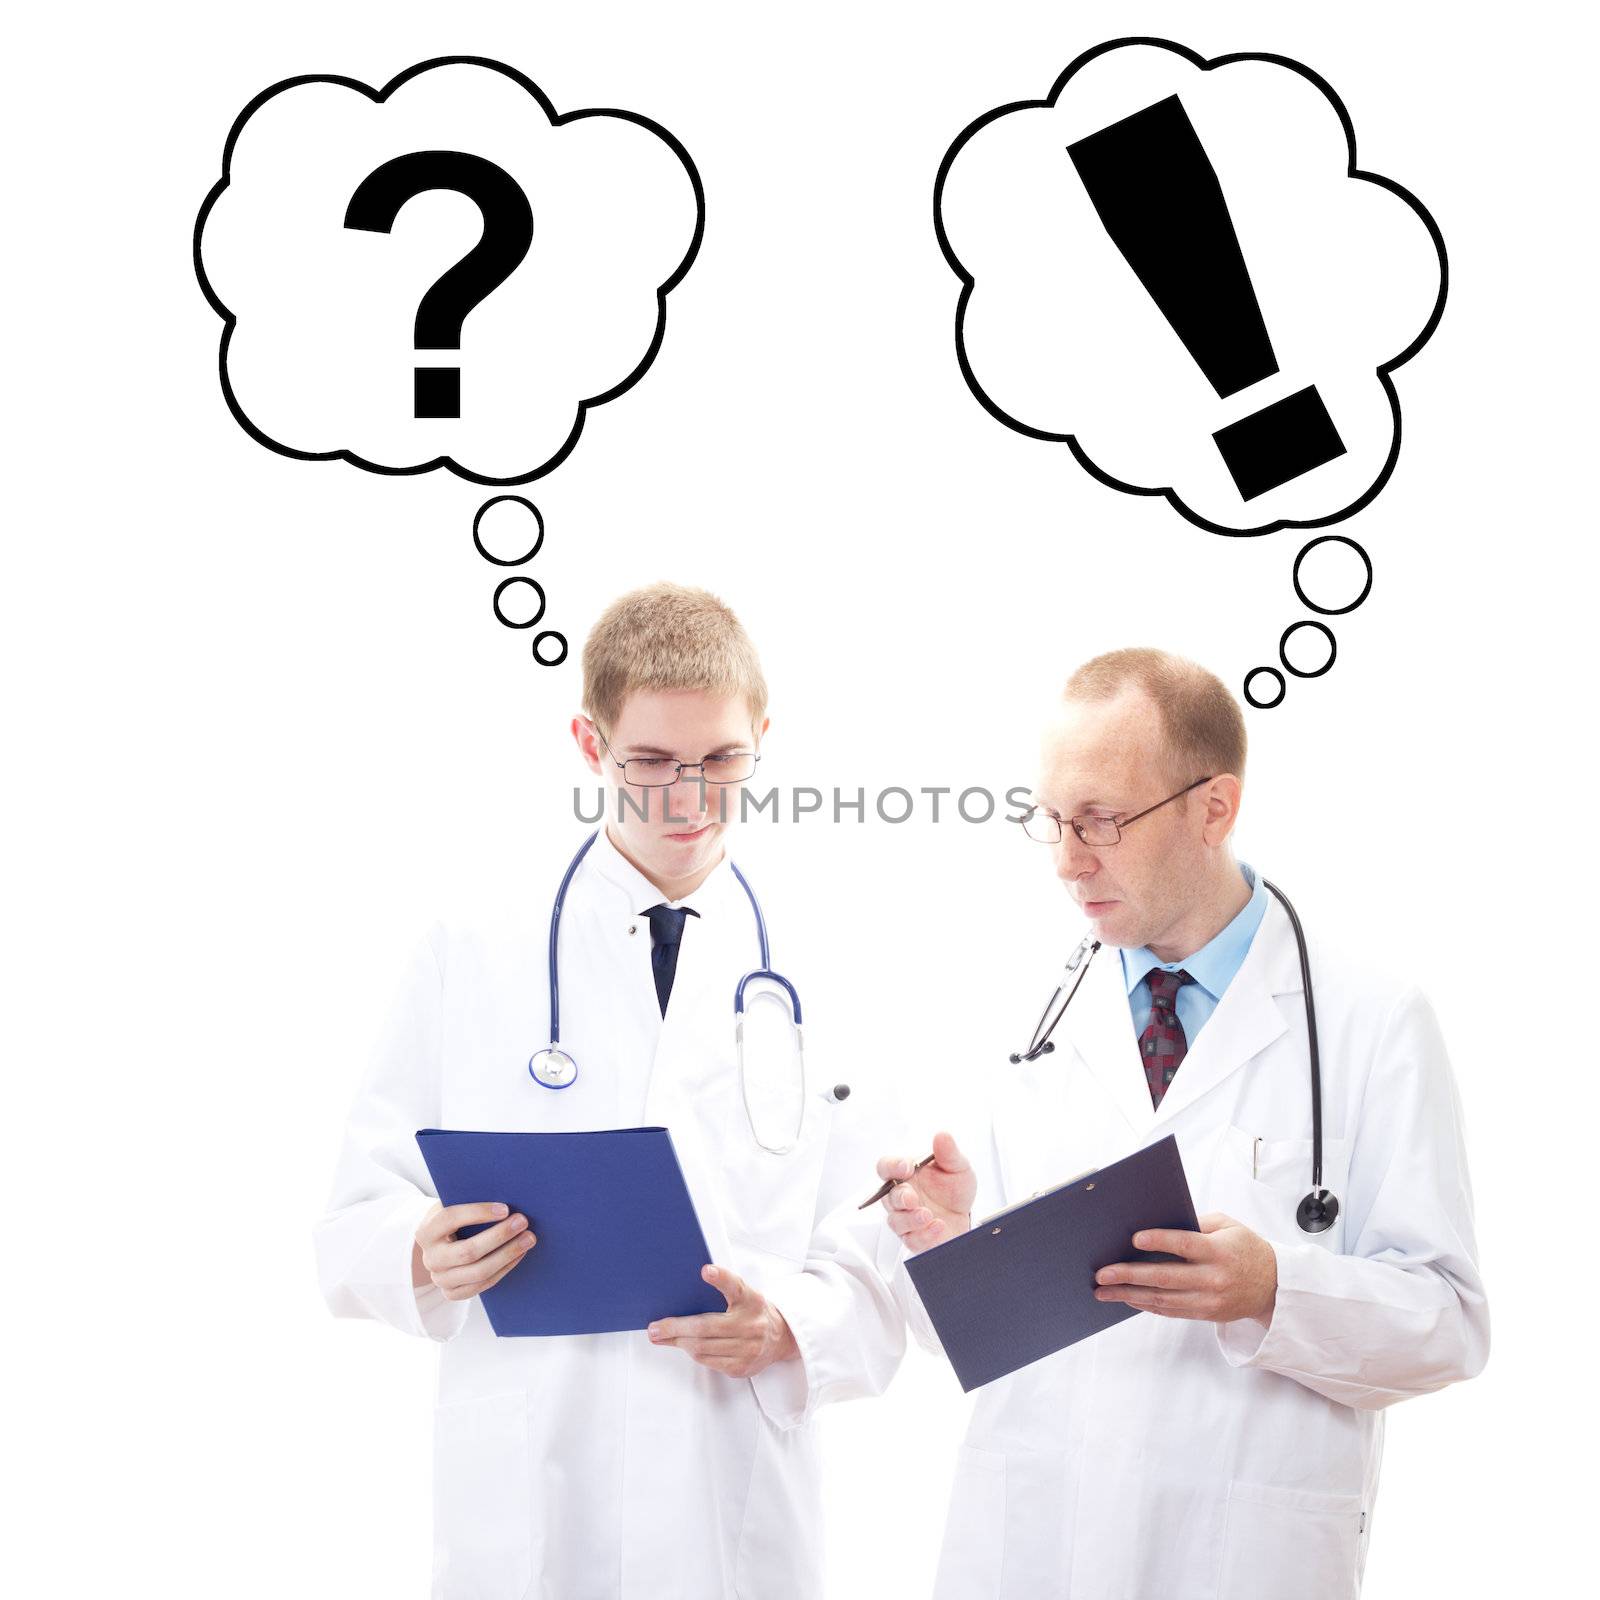 Young physician does not understand the doctor by gwolters